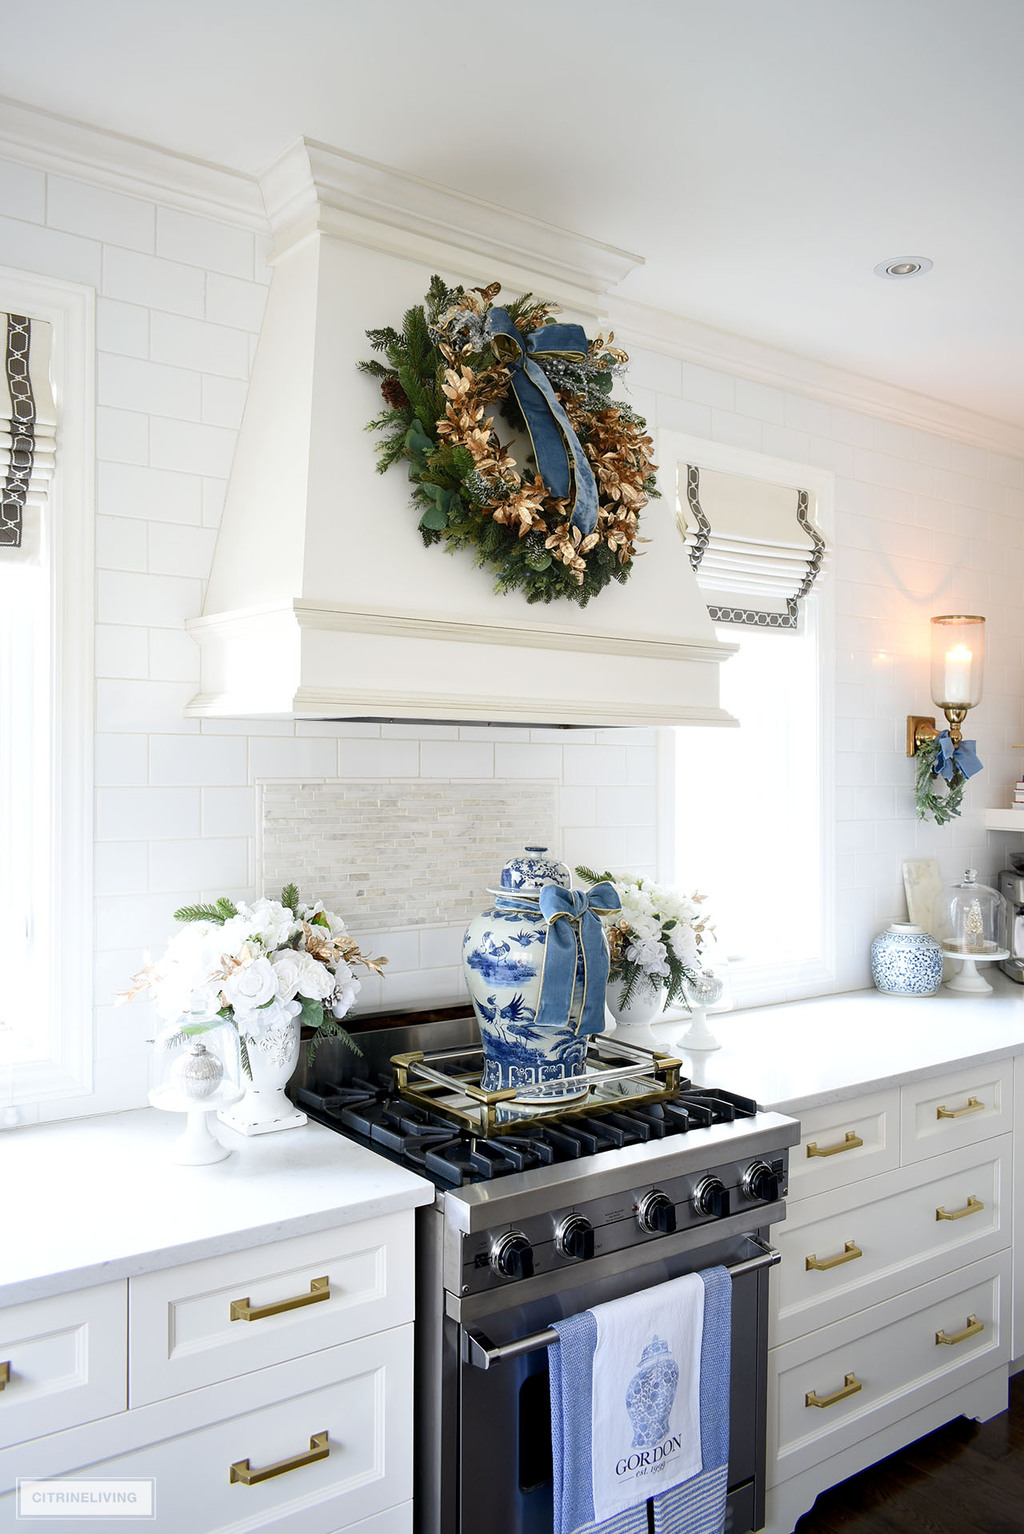 Kitchen stove styled for Christmas with a blue and white ginger jar, floral arrangements and a green and gold wreath hung on the hood above.